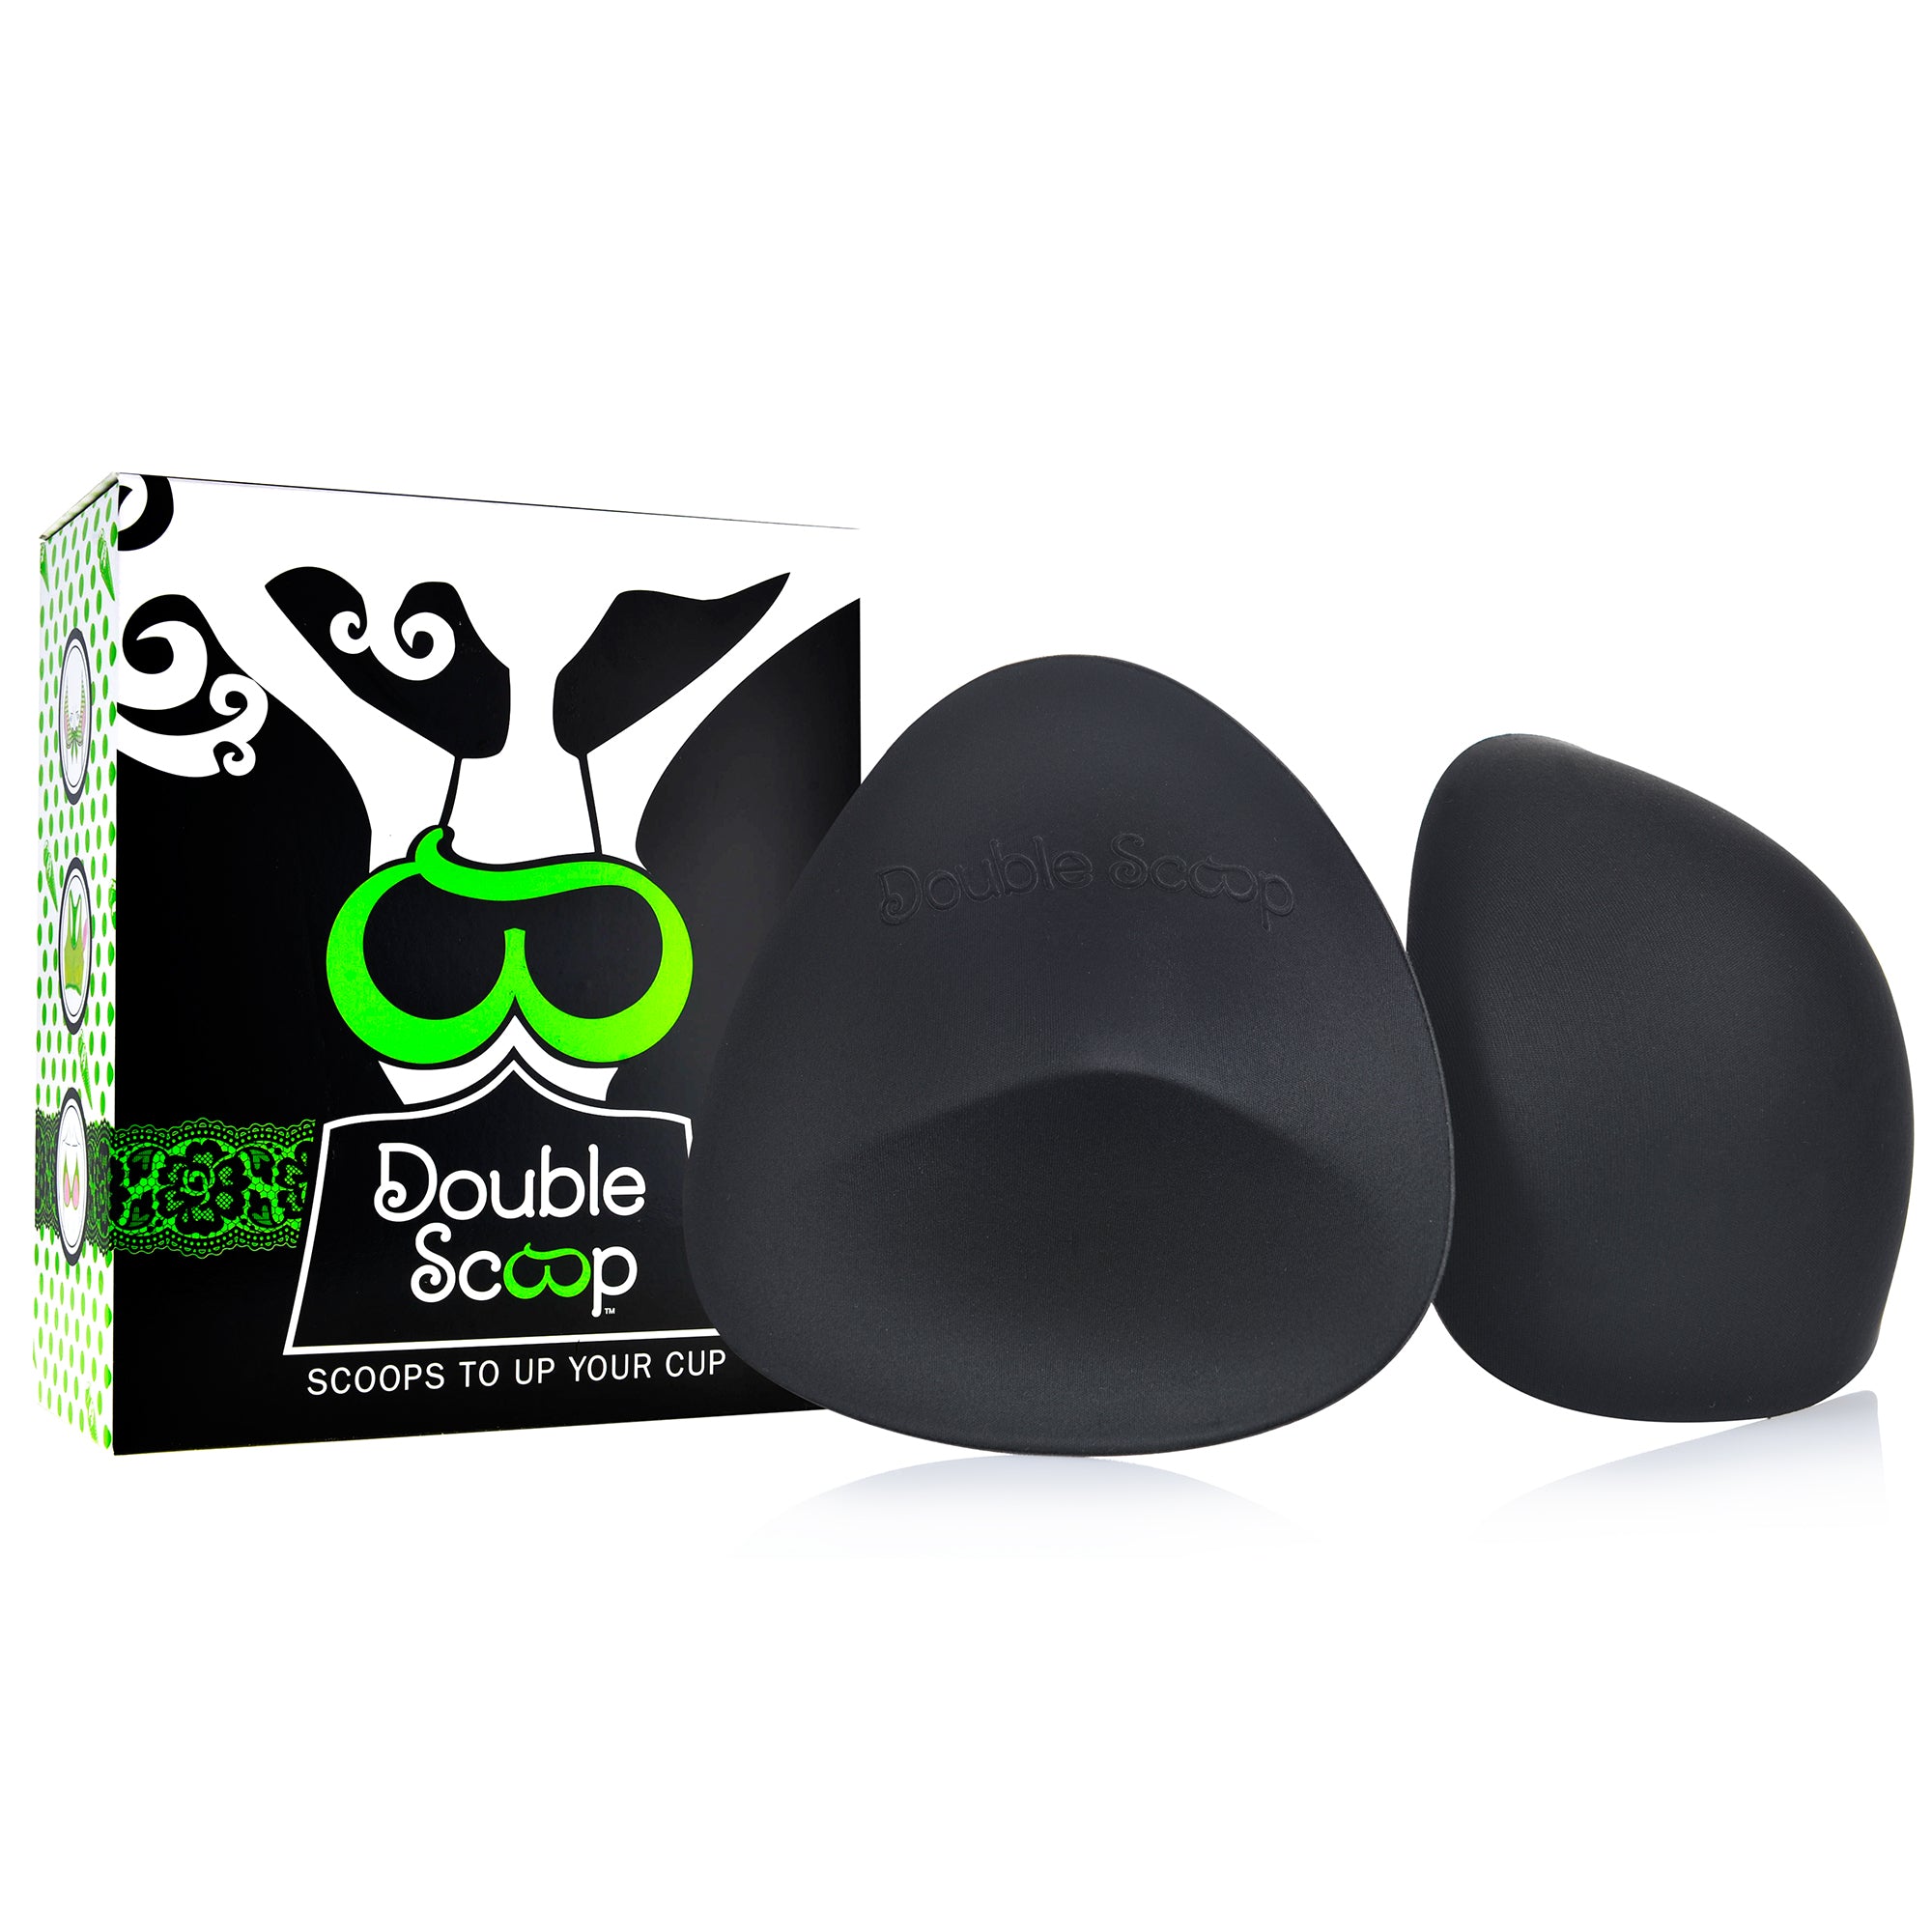 Buy Double ScoopTriangle Bra Inserts with Bonus Pack of Double